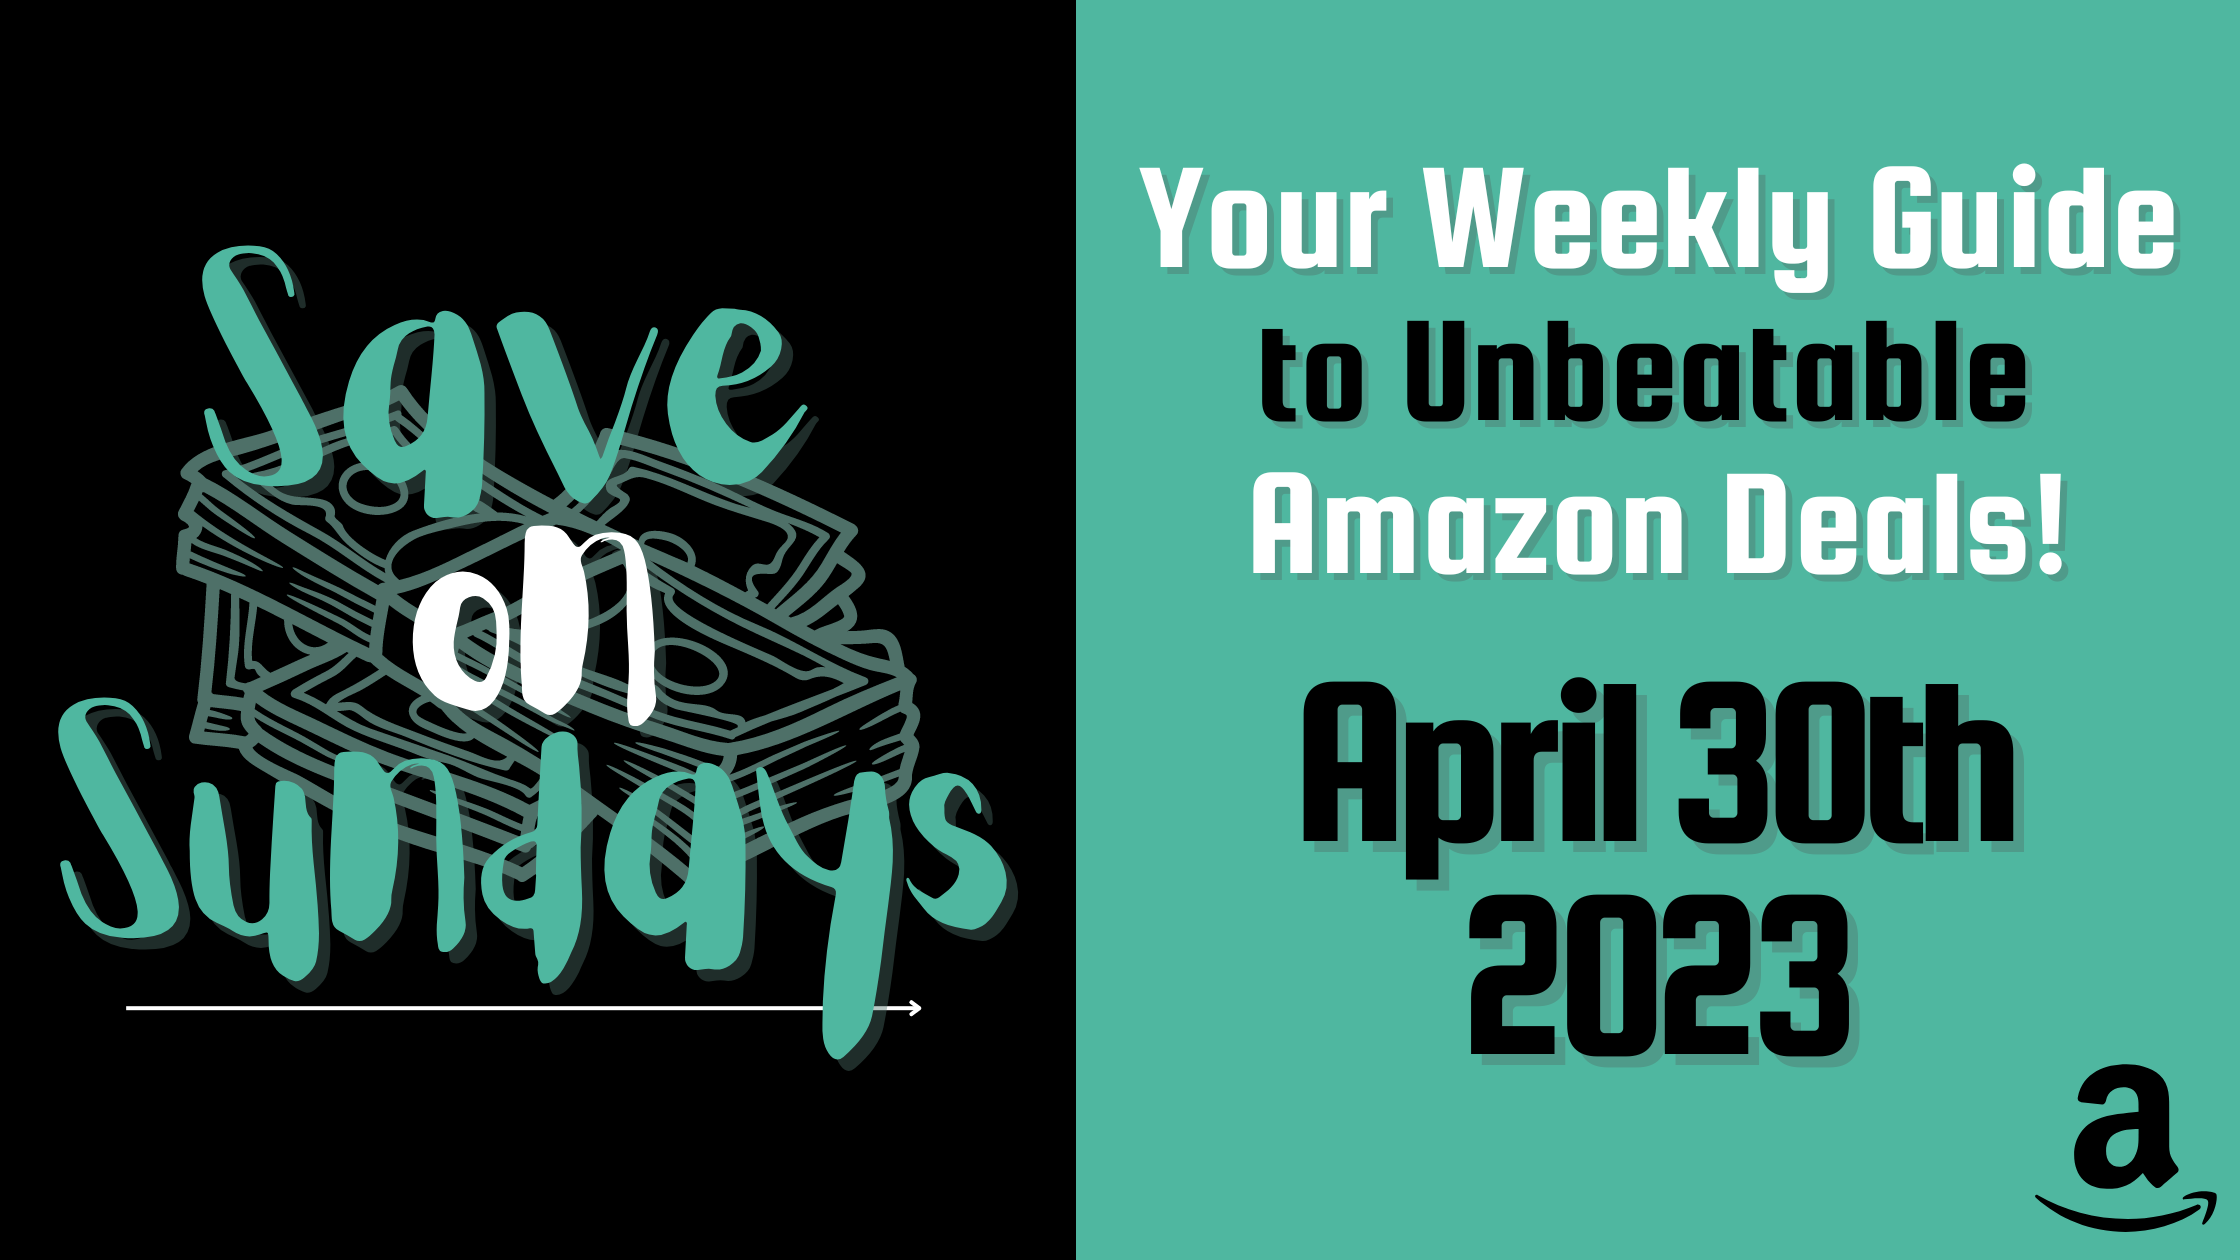 The banner image for the post, "Your Weekly Guide to Unbeatable Amazon Deals!" for April 30th, 2023